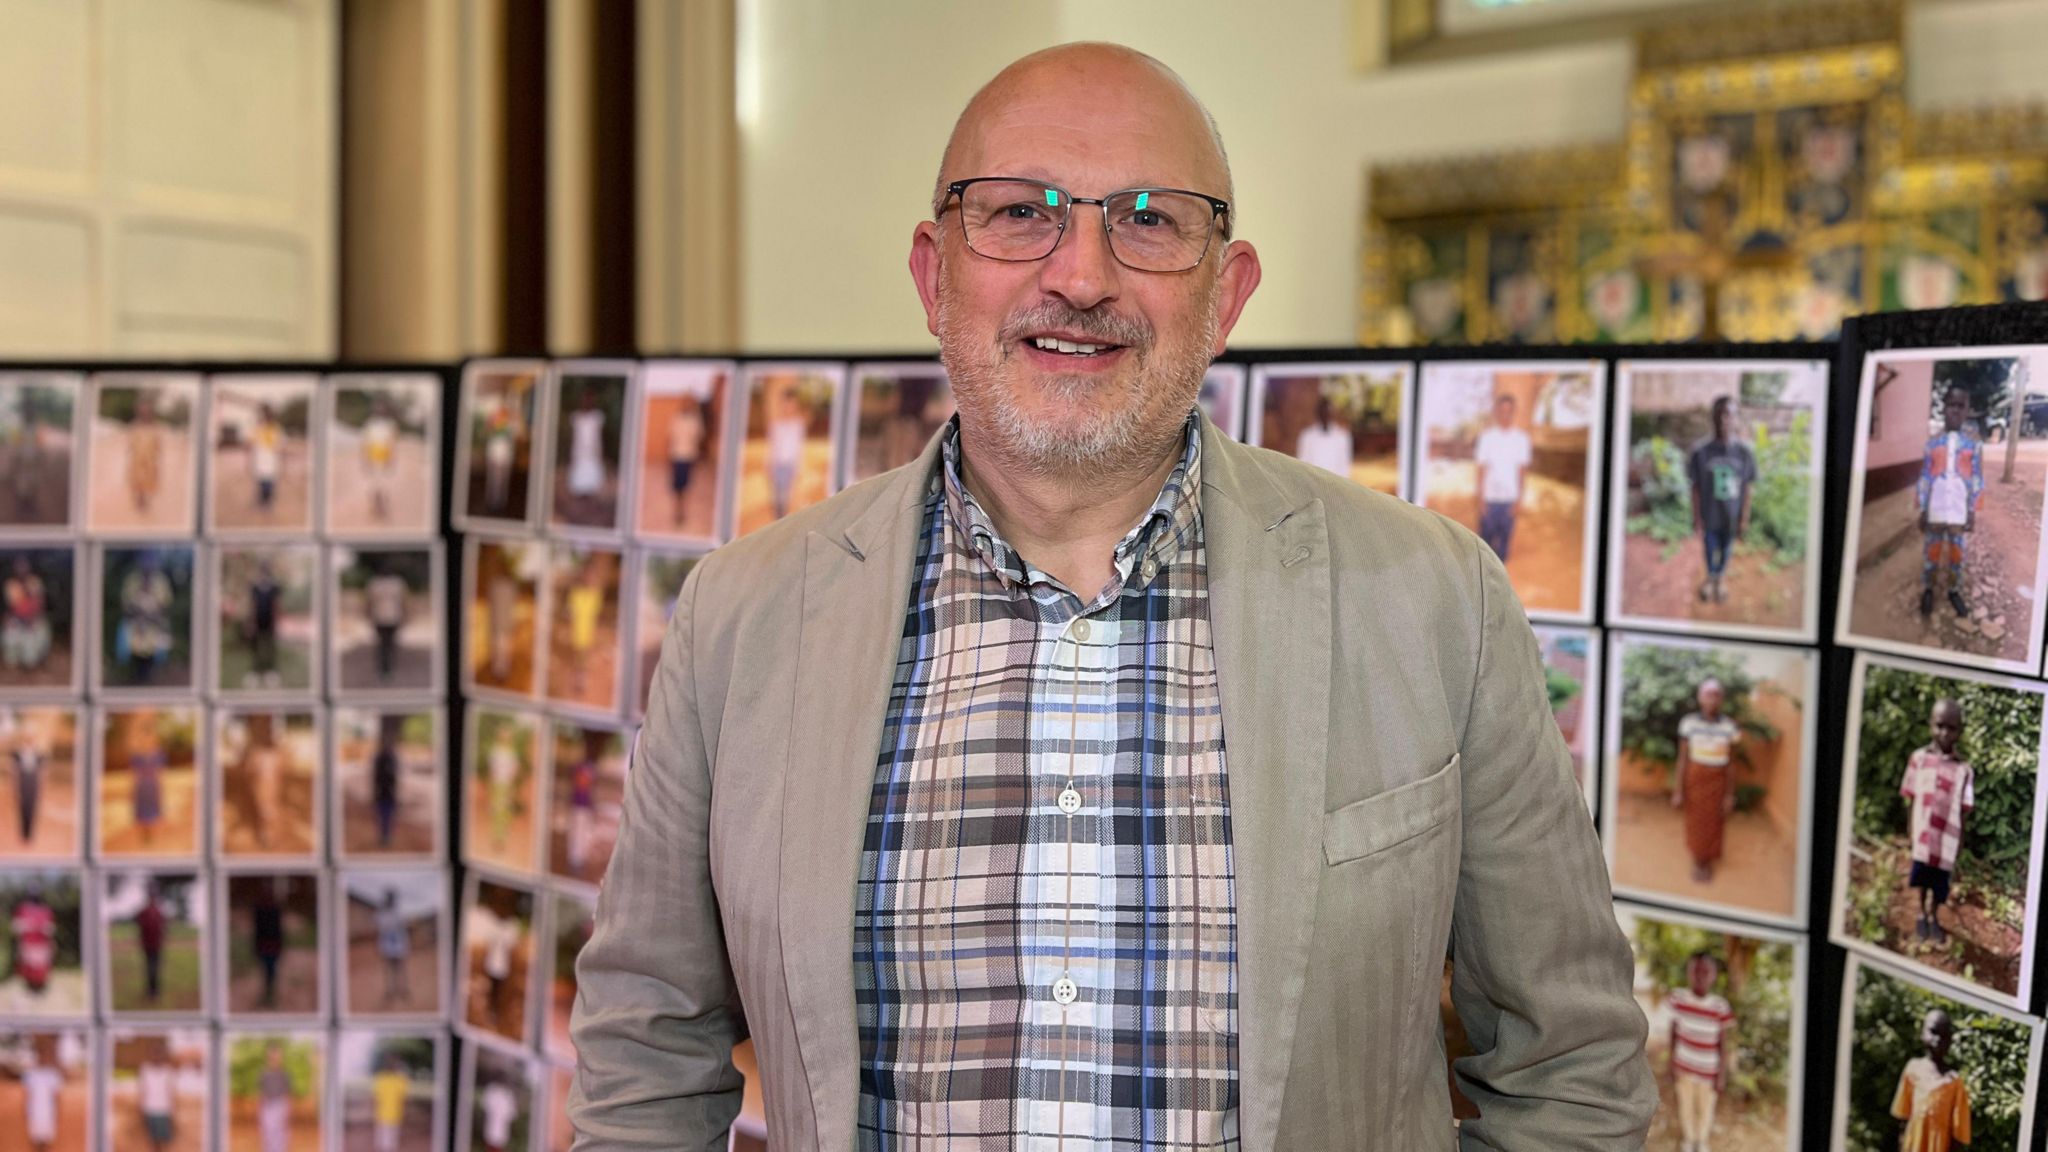 Man smiles at the camera as he stands in front of photos of people supported by Compassion UK